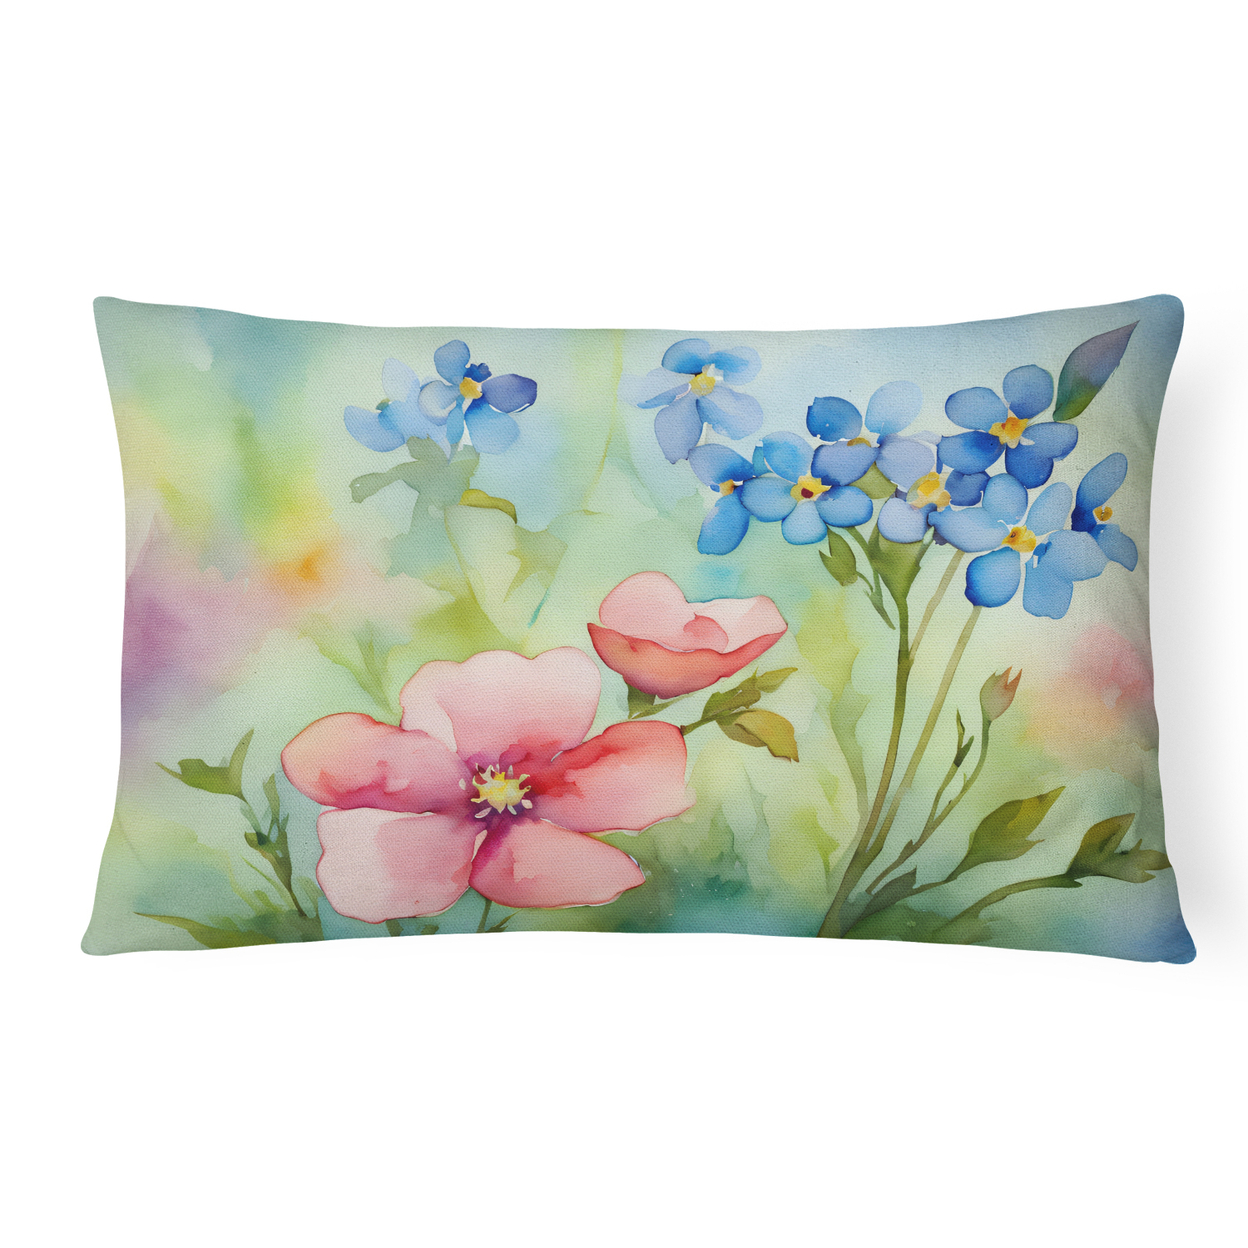 Alaska Forget-me-nots in Watercolor Fabric Decorative Pillow 12 in x 16 in - image 1 of 4